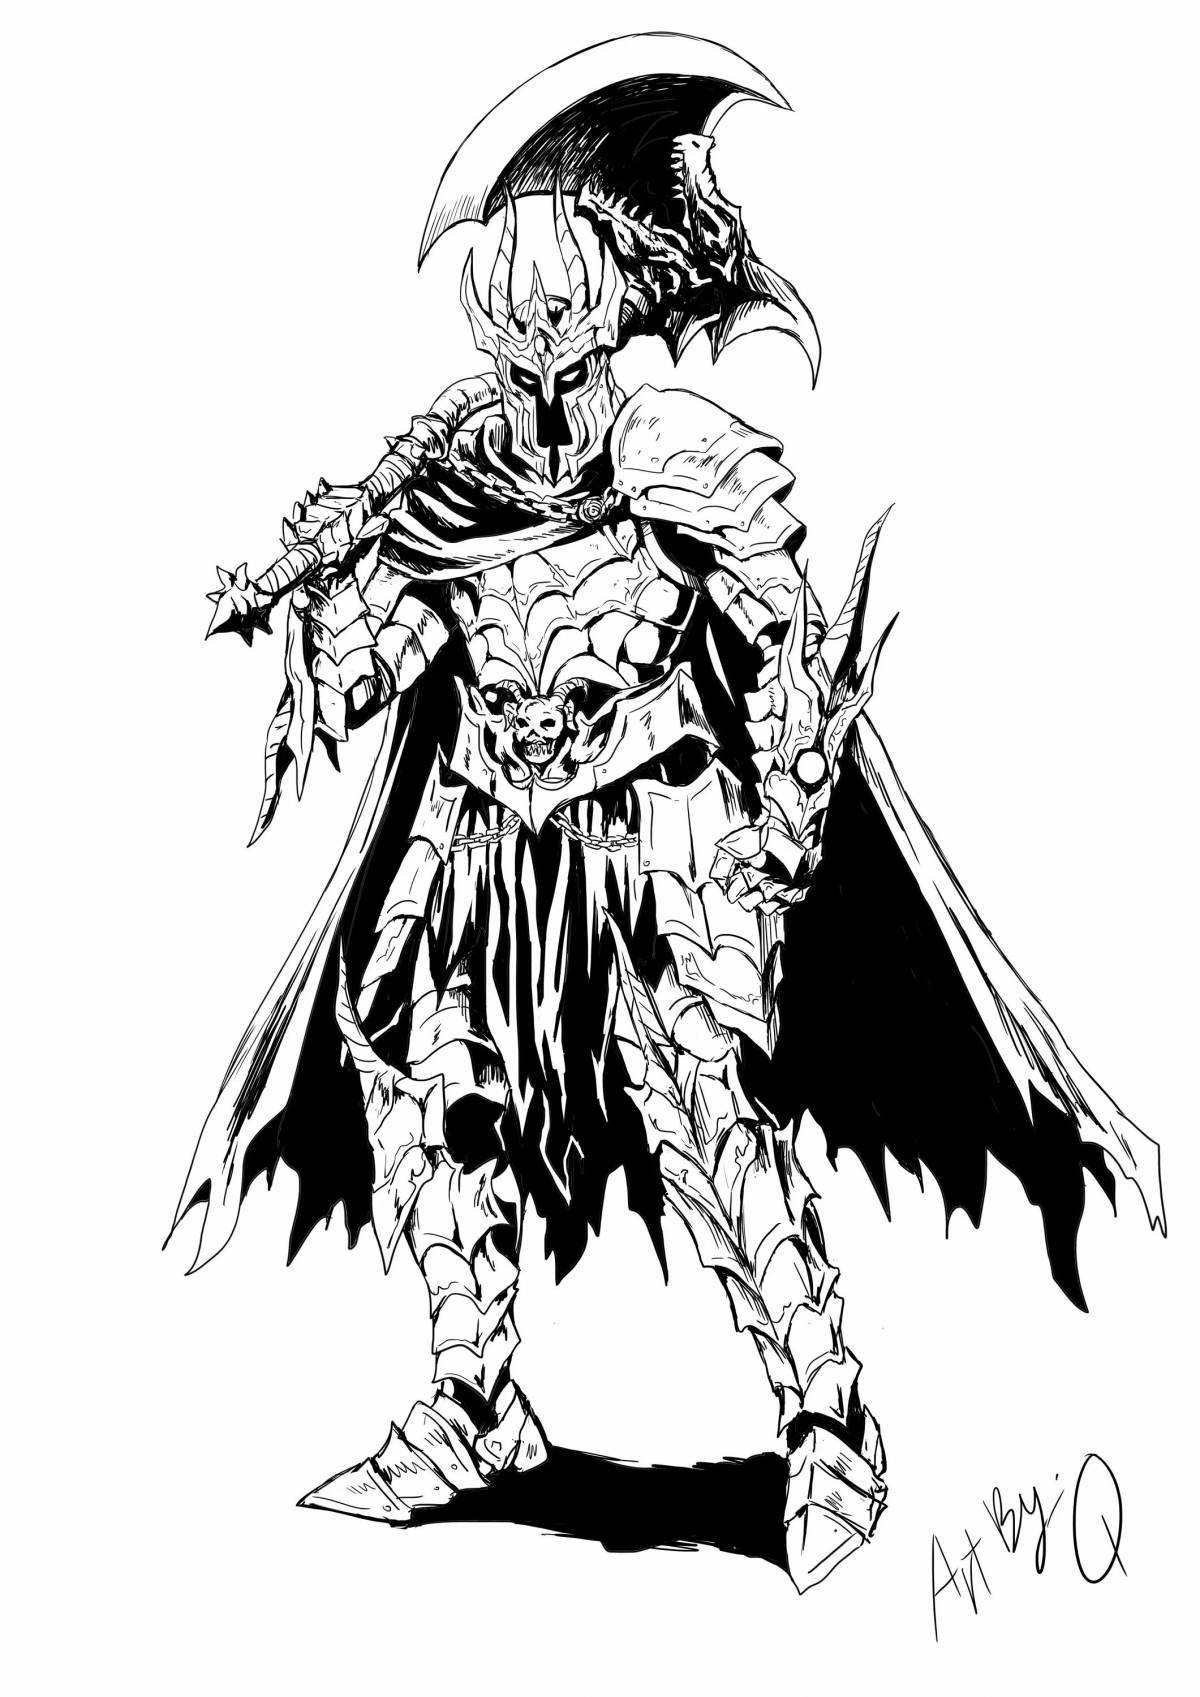 Awesome overlord coloring page